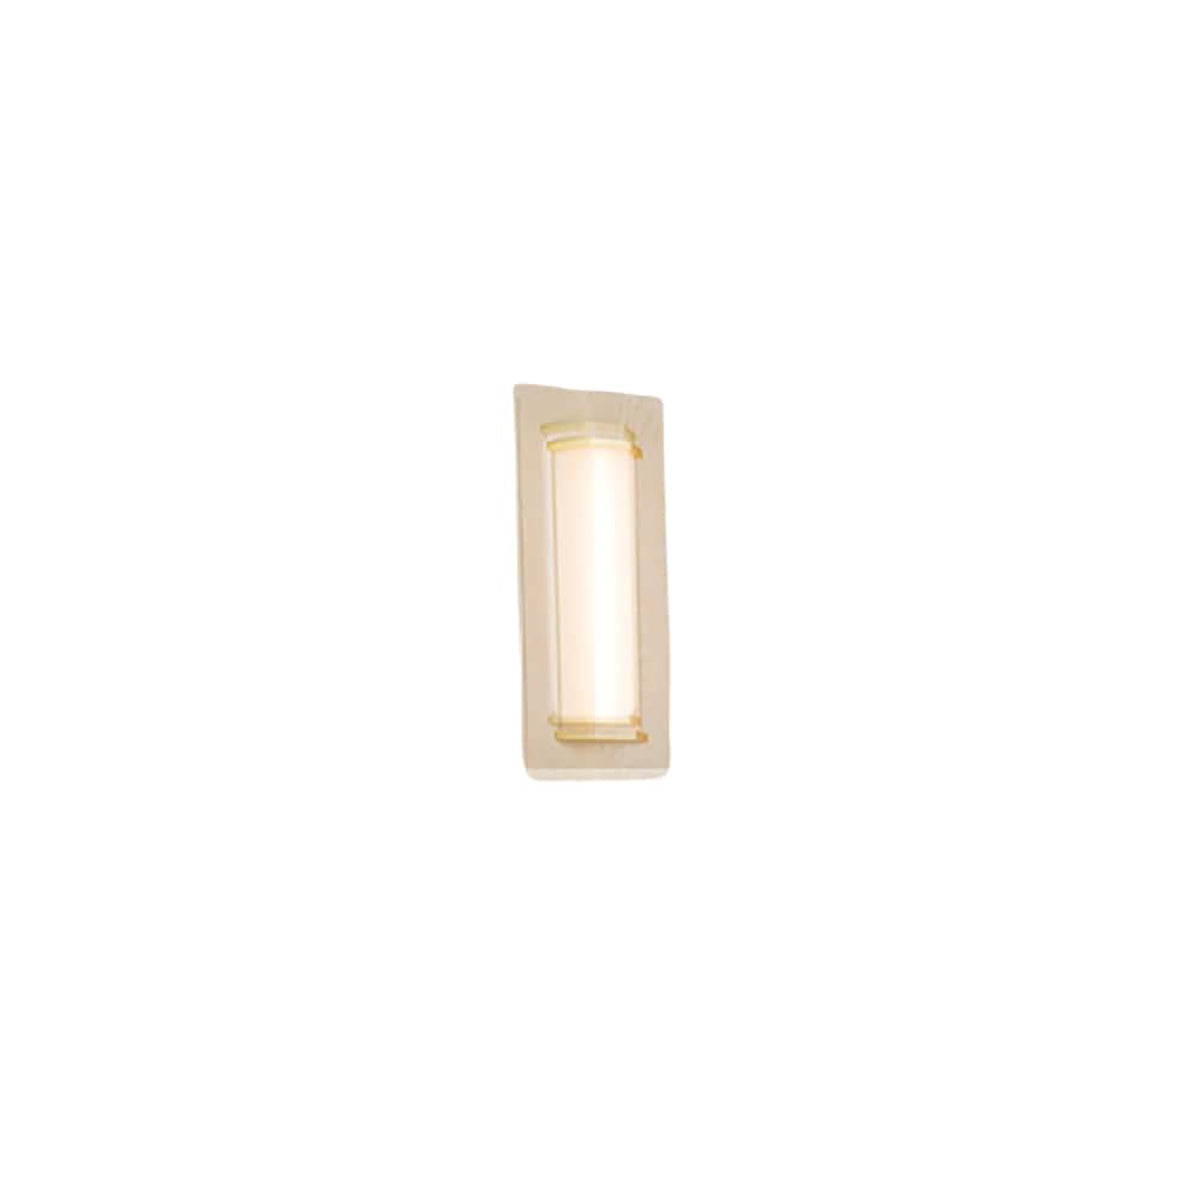 Penna 16 LED Sconce with P1 Driver